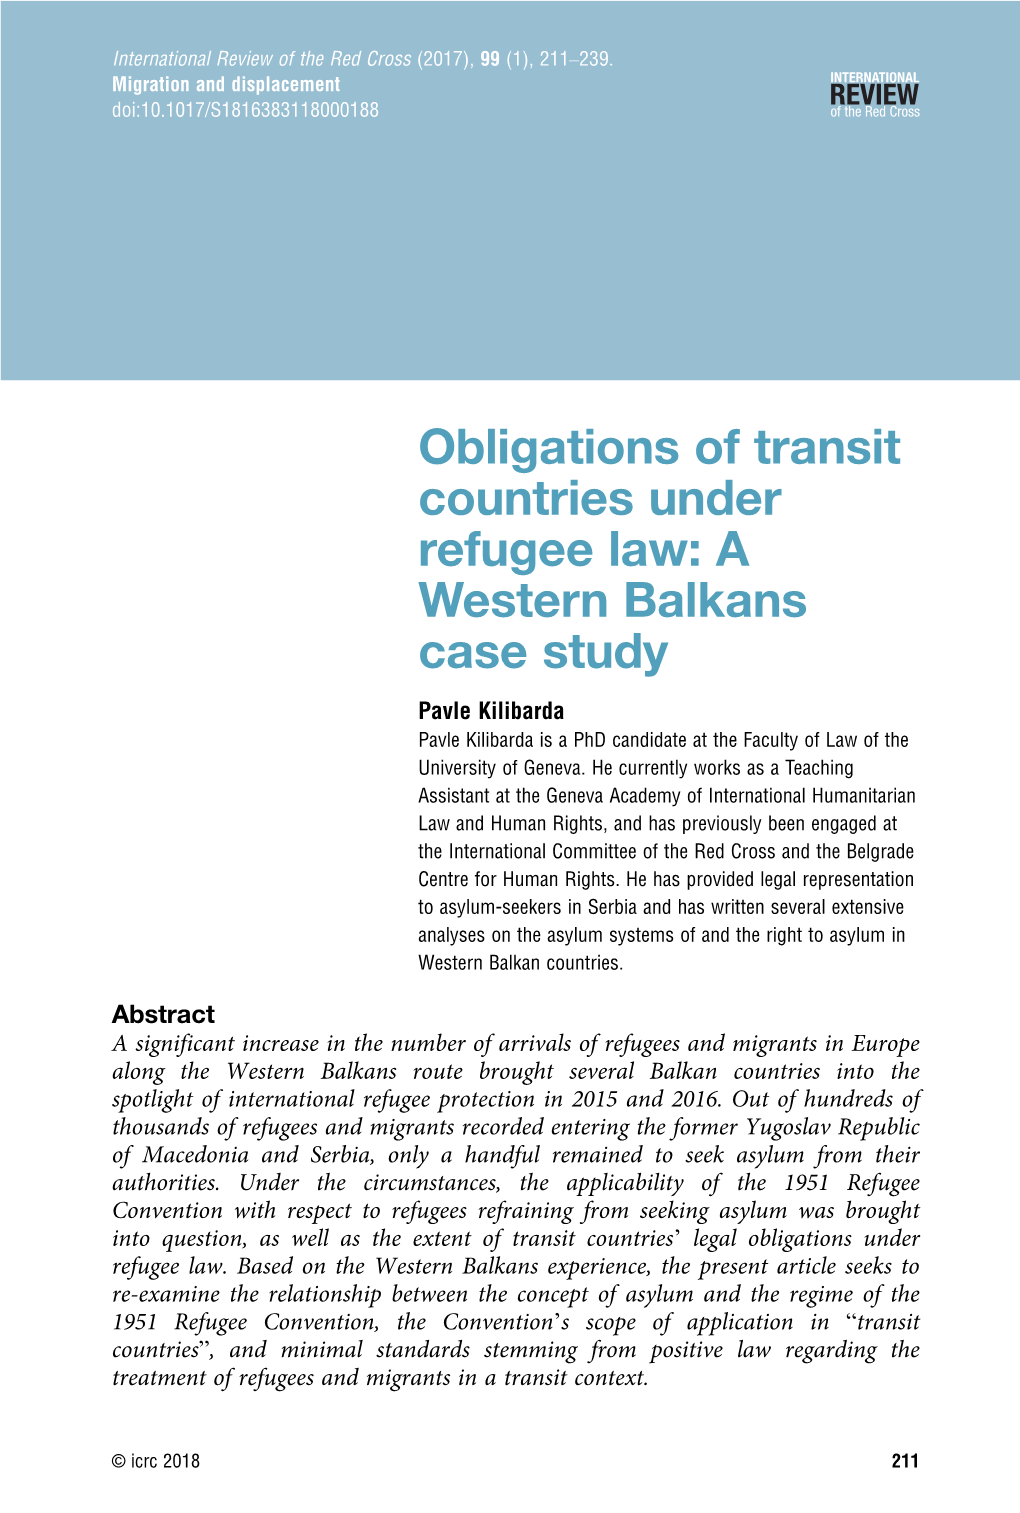 Obligations of Transit Countries Under Refugee